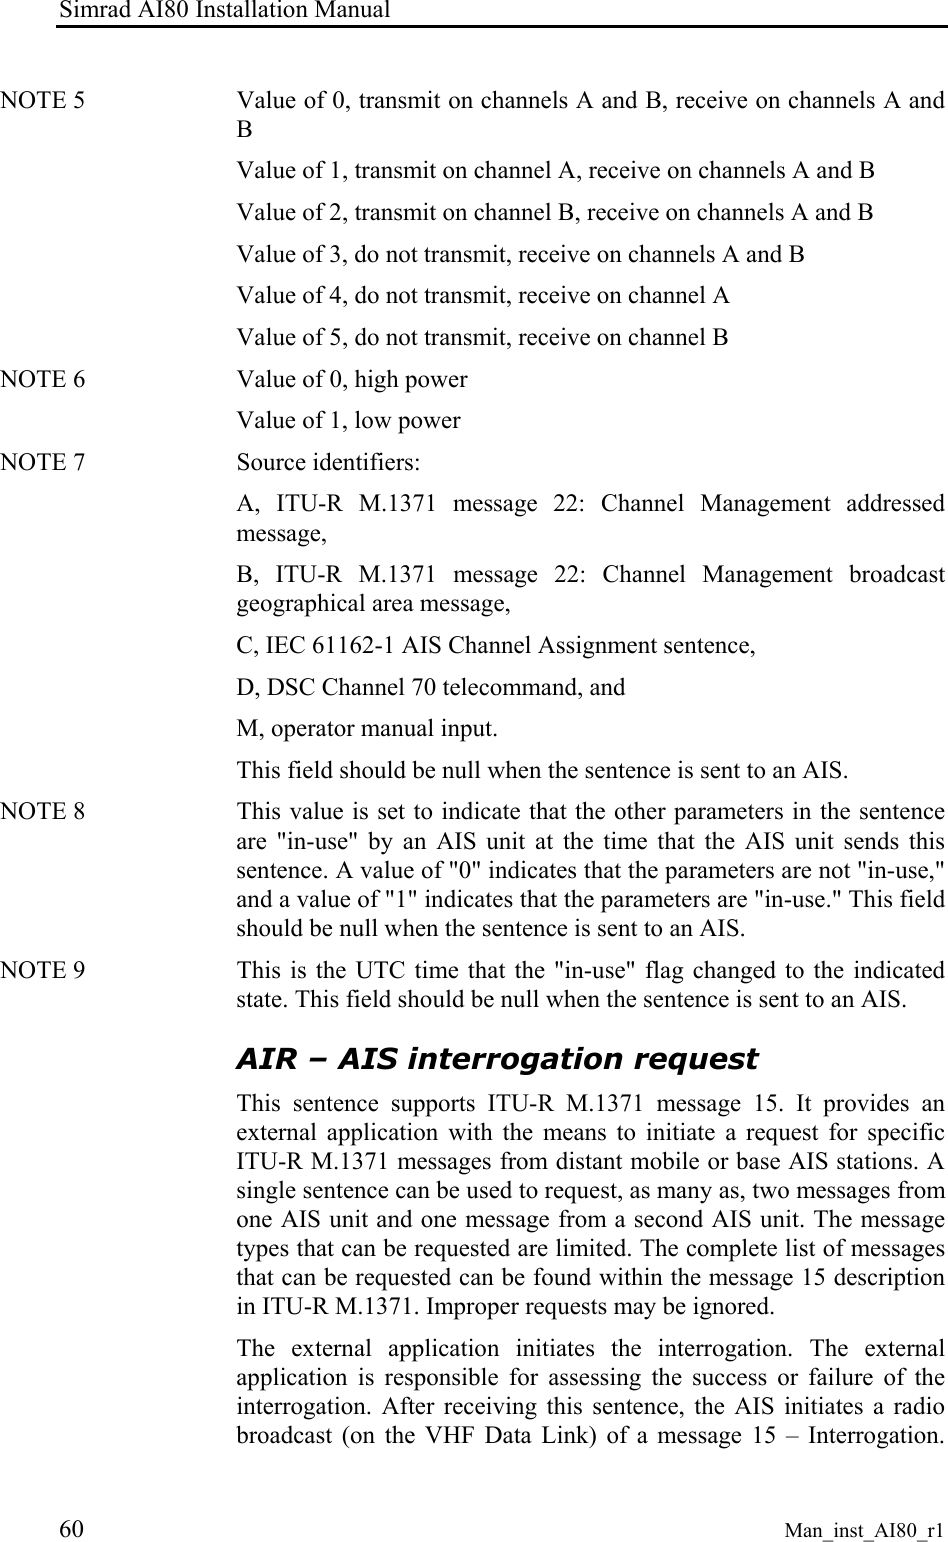 Simrad AI80 Installation Manual 60 Man_inst_AI80_r1 NOTE 5   Value of 0, transmit on channels A and B, receive on channels A and B Value of 1, transmit on channel A, receive on channels A and B Value of 2, transmit on channel B, receive on channels A and B Value of 3, do not transmit, receive on channels A and B Value of 4, do not transmit, receive on channel A Value of 5, do not transmit, receive on channel B NOTE 6   Value of 0, high power Value of 1, low power NOTE 7   Source identifiers: A, ITU-R M.1371 message 22: Channel Management addressed message, B, ITU-R M.1371 message 22: Channel Management broadcast geographical area message, C, IEC 61162-1 AIS Channel Assignment sentence, D, DSC Channel 70 telecommand, and M, operator manual input. This field should be null when the sentence is sent to an AIS. NOTE 8   This value is set to indicate that the other parameters in the sentence are &quot;in-use&quot; by an AIS unit at the time that the AIS unit sends this sentence. A value of &quot;0&quot; indicates that the parameters are not &quot;in-use,&quot; and a value of &quot;1&quot; indicates that the parameters are &quot;in-use.&quot; This field should be null when the sentence is sent to an AIS. NOTE 9   This is the UTC time that the &quot;in-use&quot; flag changed to the indicated state. This field should be null when the sentence is sent to an AIS. AIR – AIS interrogation request This sentence supports ITU-R M.1371 message 15. It provides an external application with the means to initiate a request for specific ITU-R M.1371 messages from distant mobile or base AIS stations. A single sentence can be used to request, as many as, two messages from one AIS unit and one message from a second AIS unit. The message types that can be requested are limited. The complete list of messages that can be requested can be found within the message 15 description in ITU-R M.1371. Improper requests may be ignored. The external application initiates the interrogation. The external application is responsible for assessing the success or failure of the interrogation. After receiving this sentence, the AIS initiates a radio broadcast (on the VHF Data Link) of a message 15 – Interrogation. 